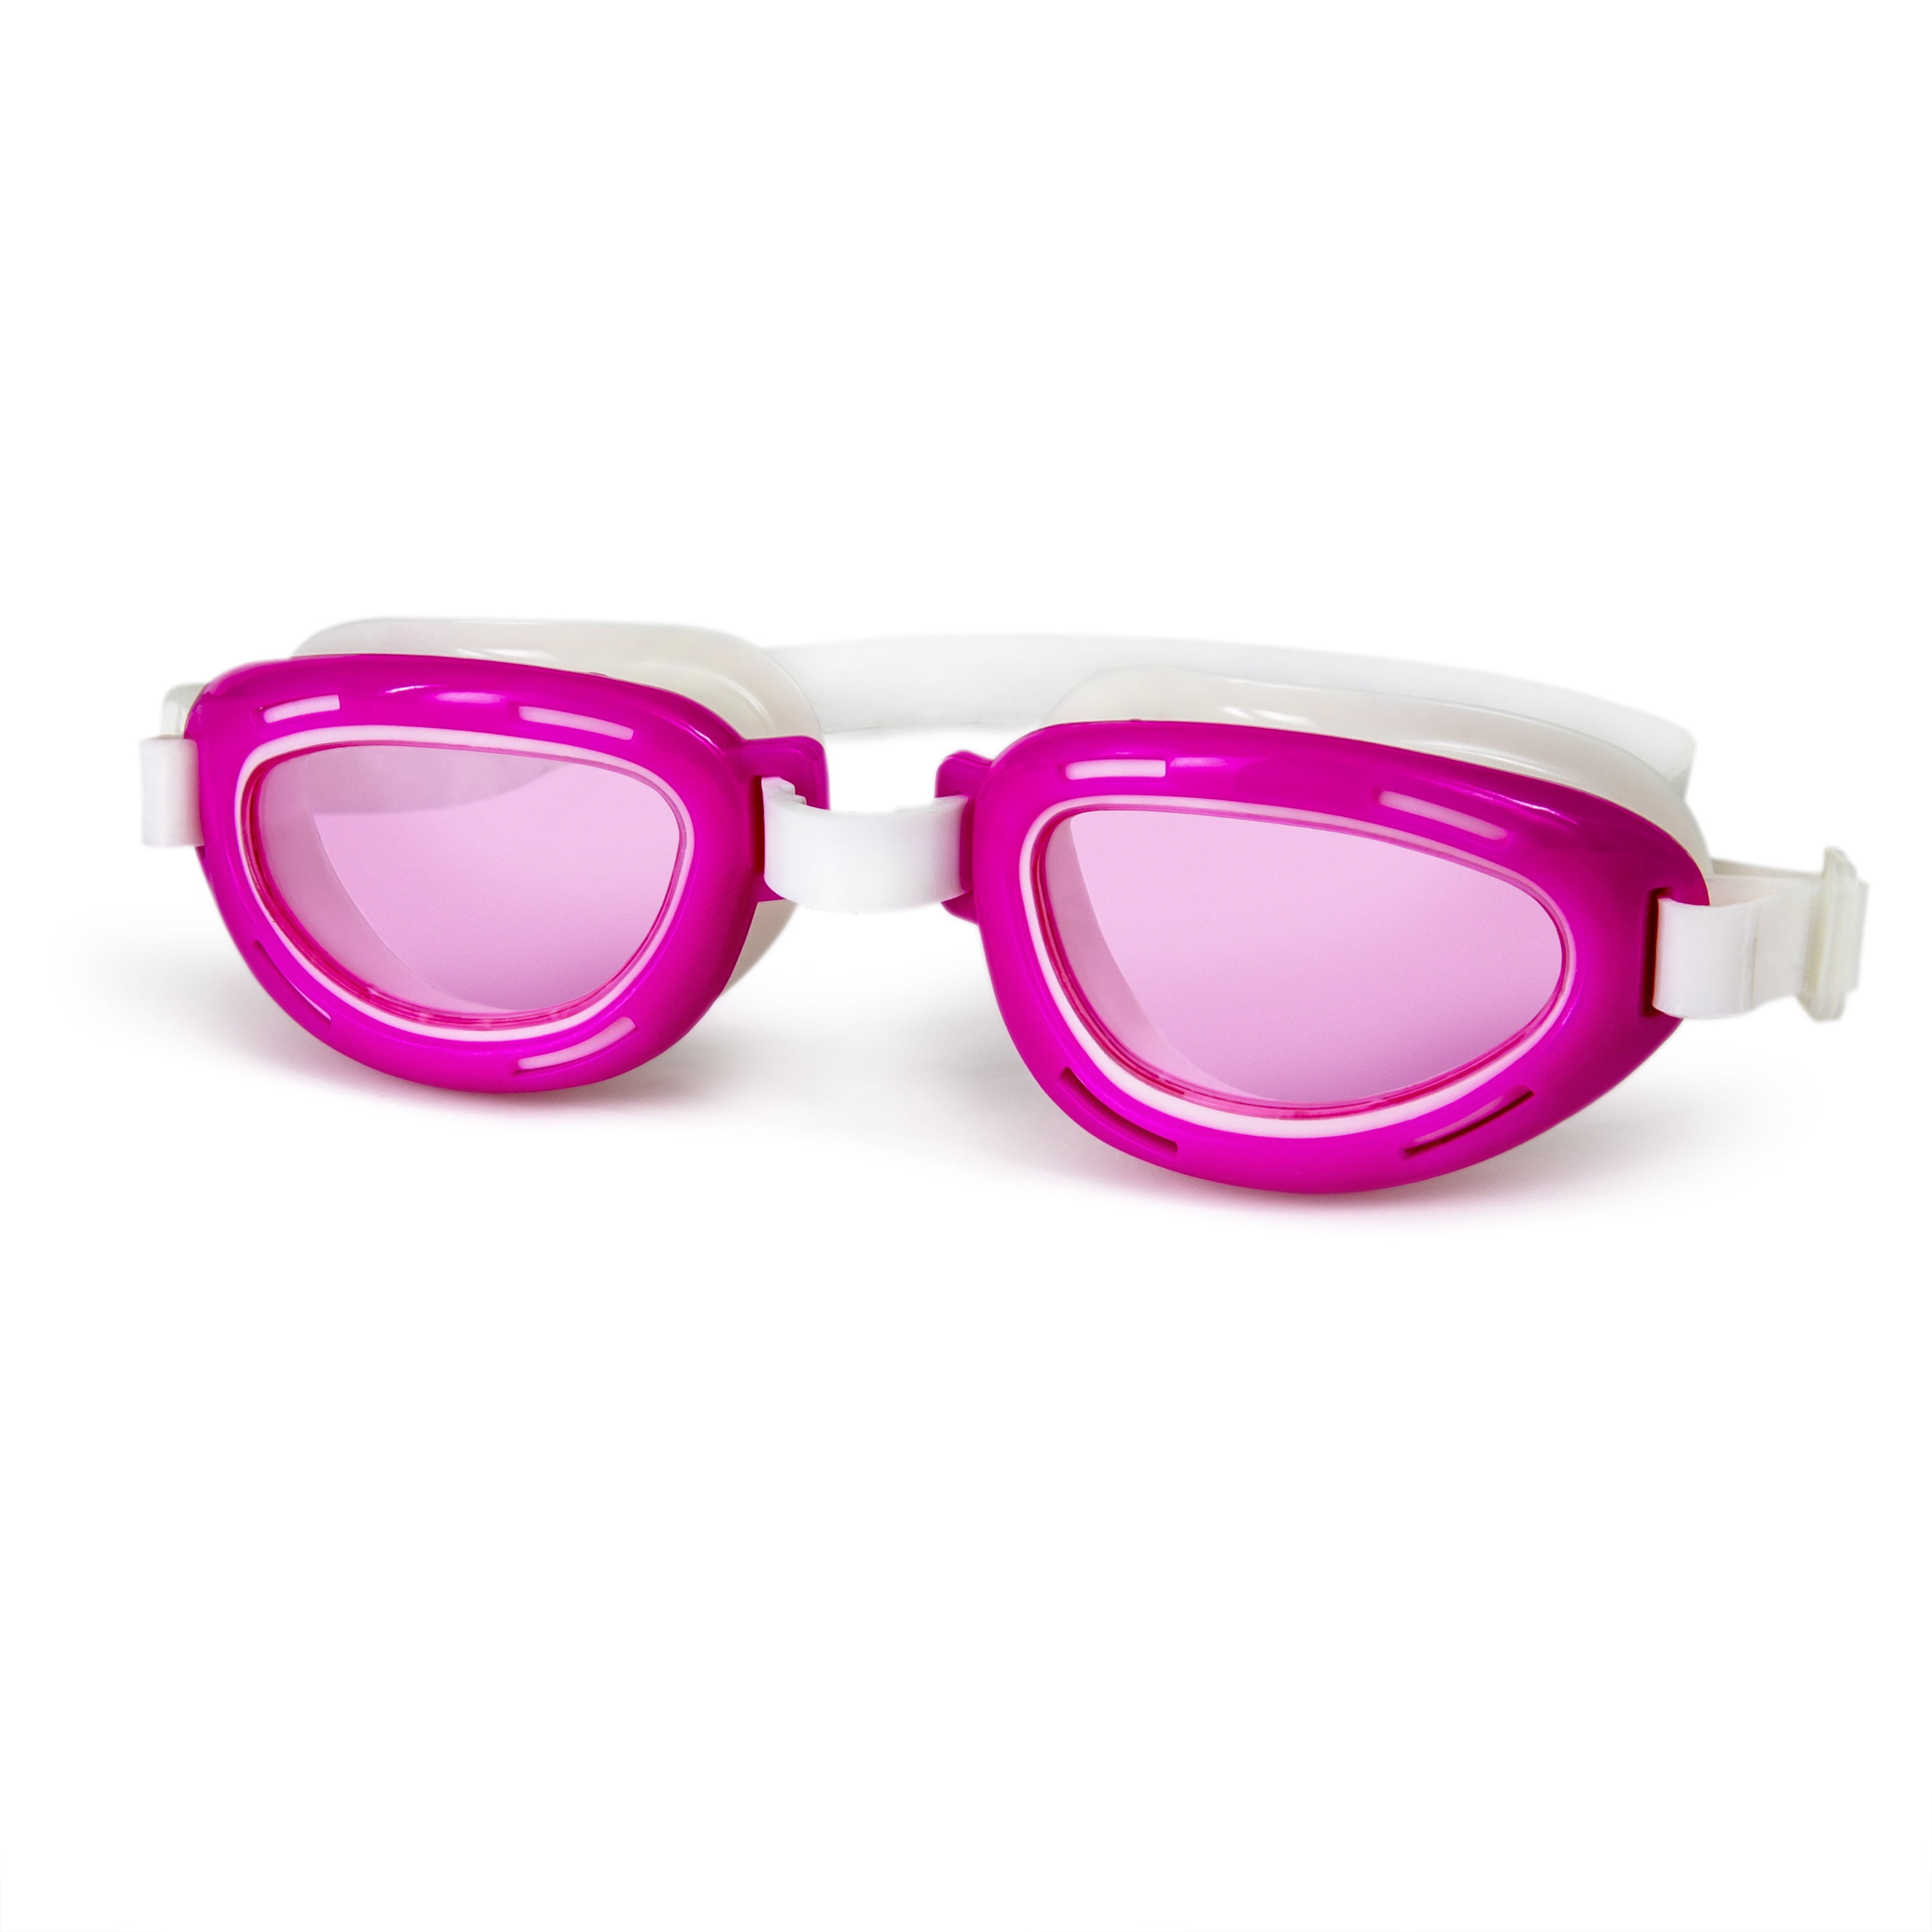 Dolfino Premier Adult ages 12+ Water Goggles FREE SHIPPING! Pink 